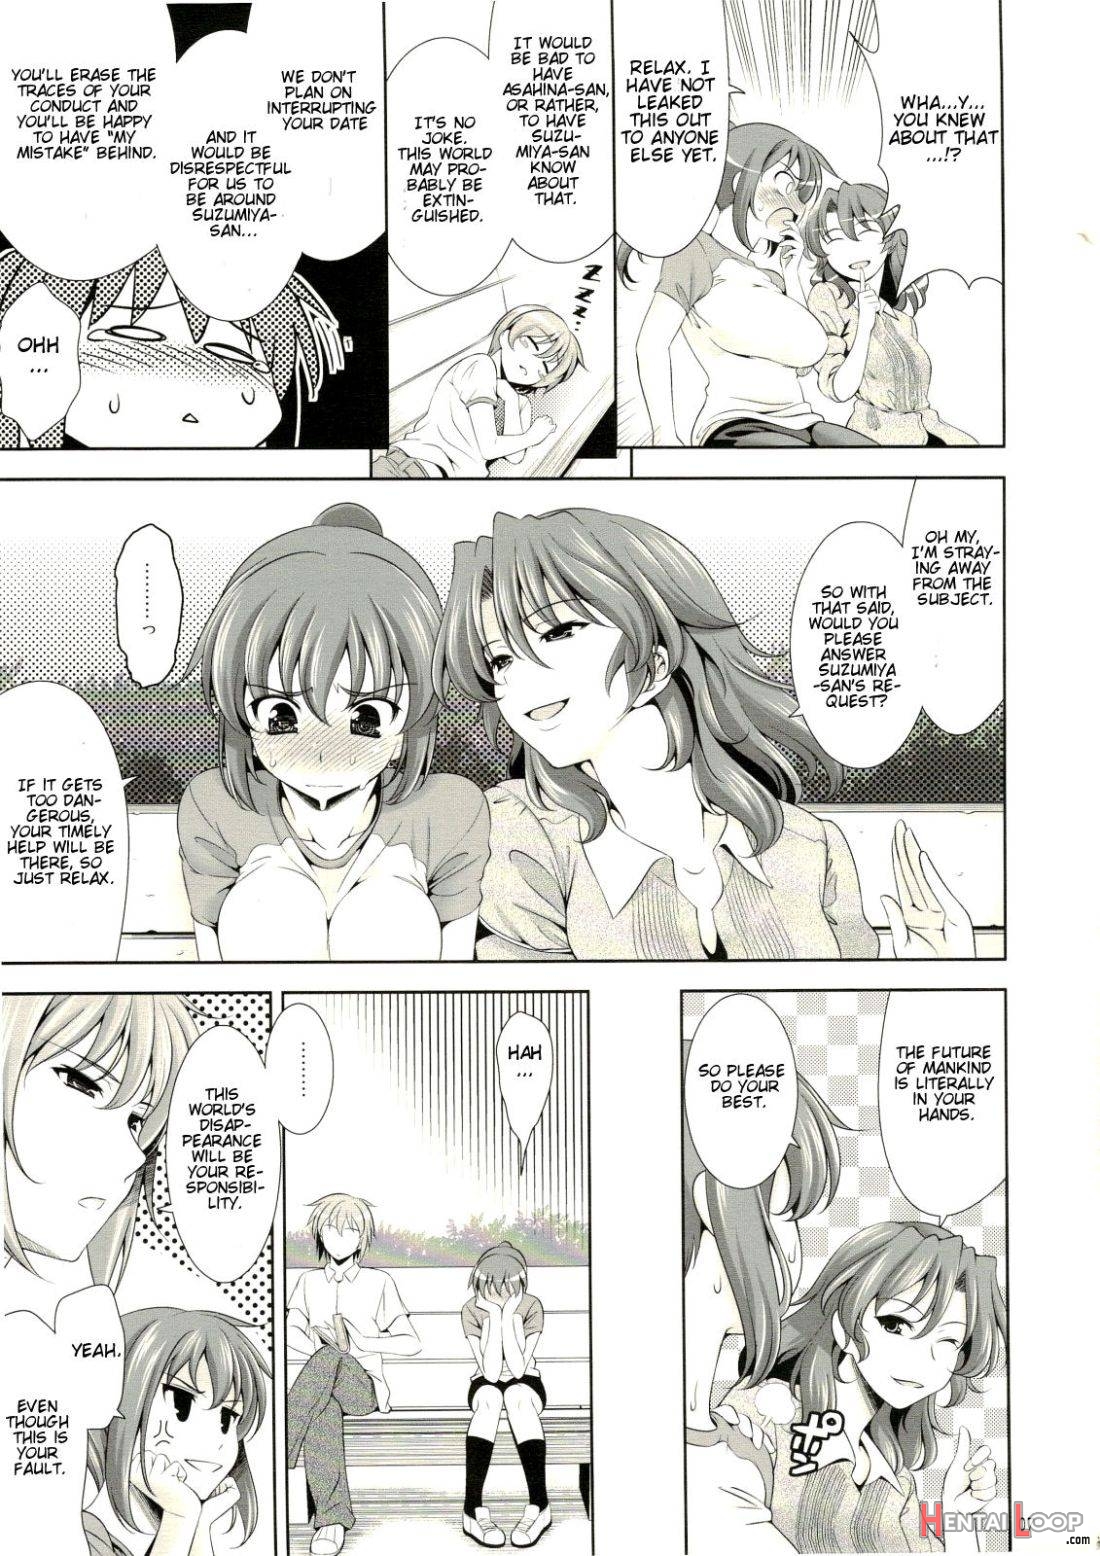 Manatsu no Yo no Yume no Mata Yume no Mata Yume page 4